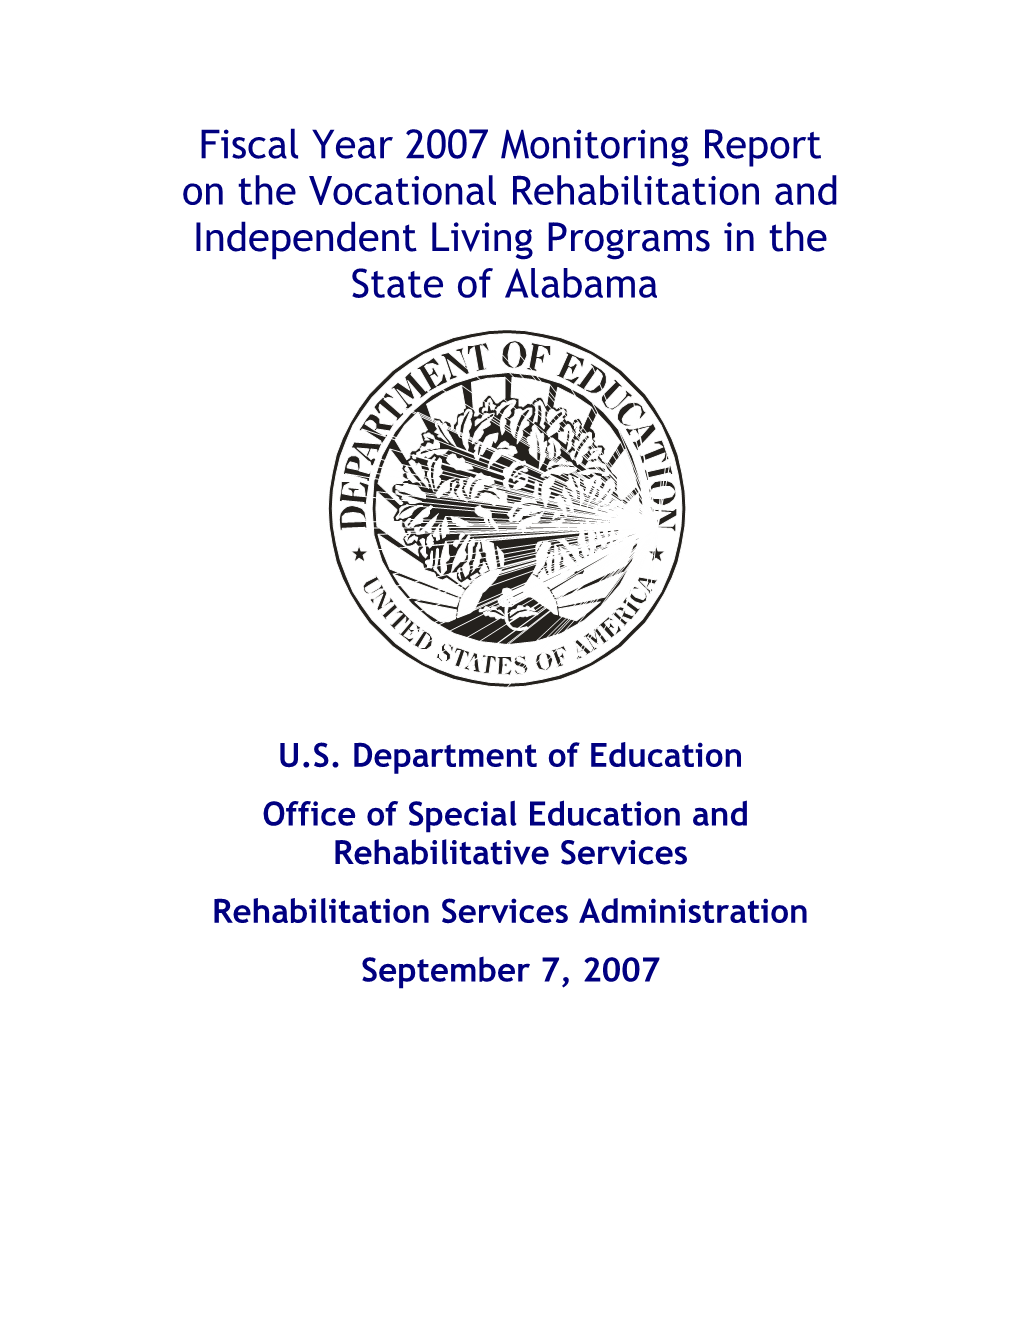 Fiscal Year 2007 Monitoring Report on the Vocational Rehabilitation and Independent Living